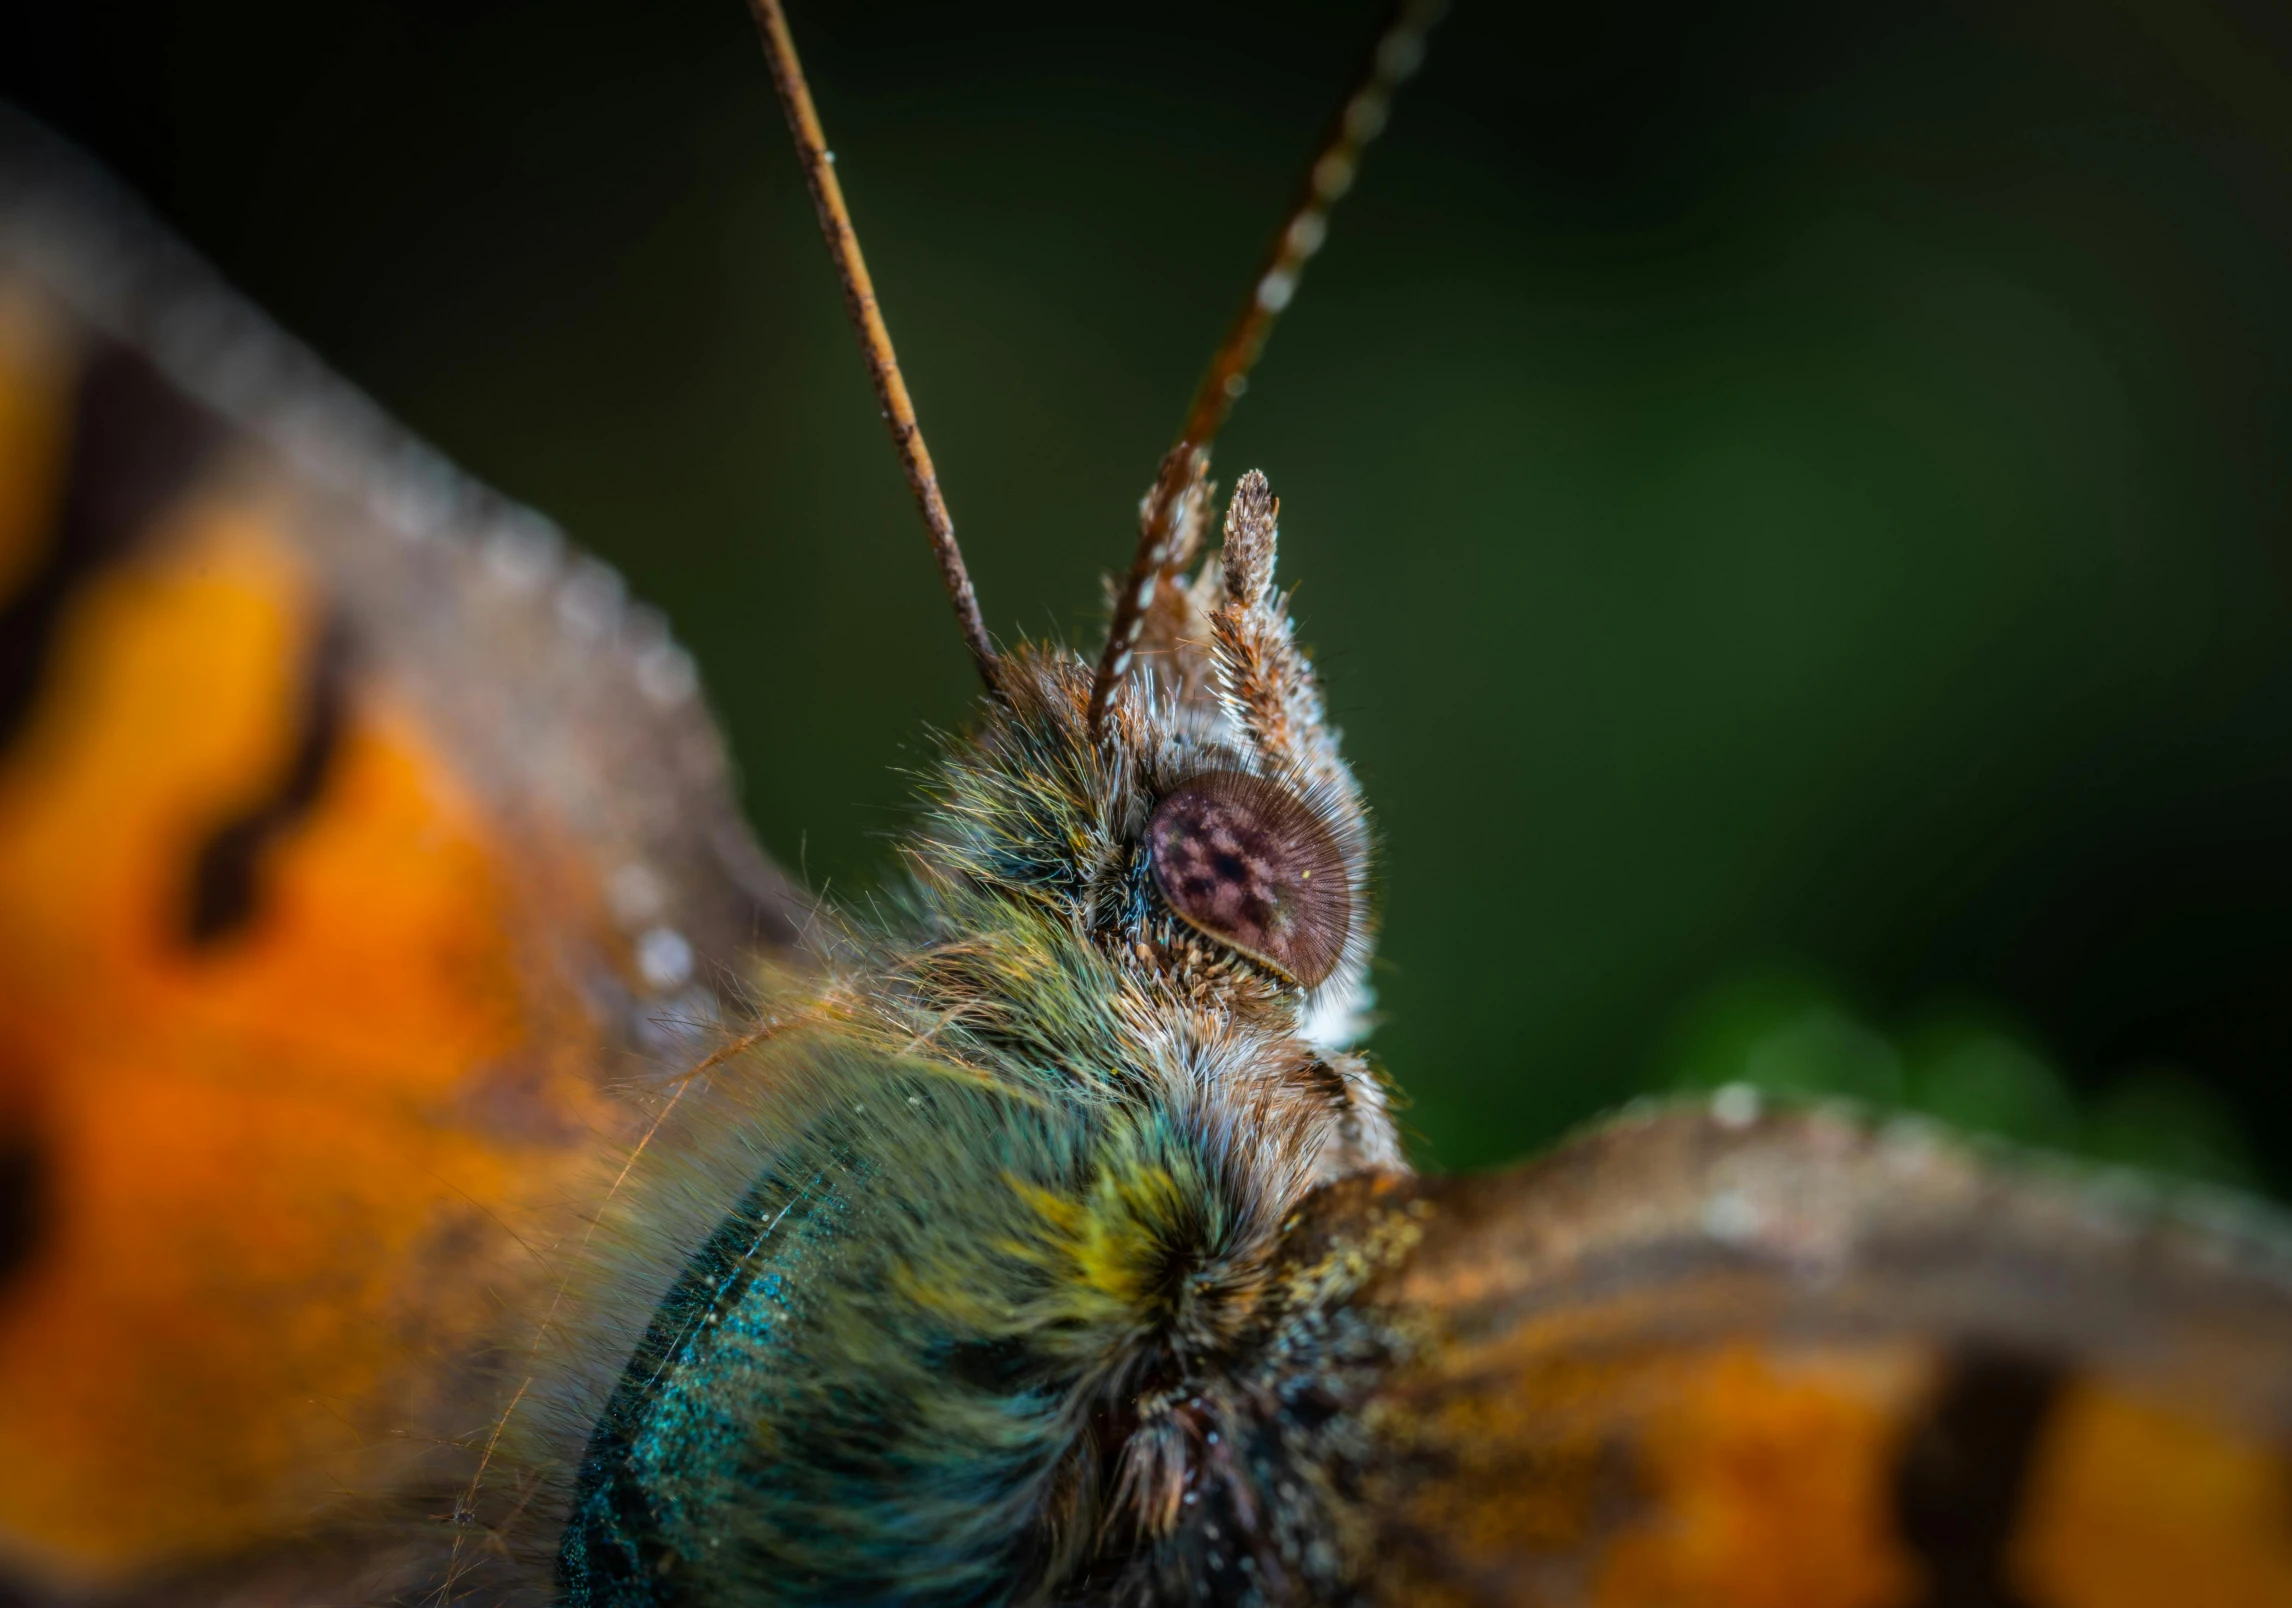 a close up of a butterfly on a leaf, a macro photograph, by Thomas Häfner, pexels contest winner, orange and teal color, close up shot a rugged, macro furry, neck zoomed in